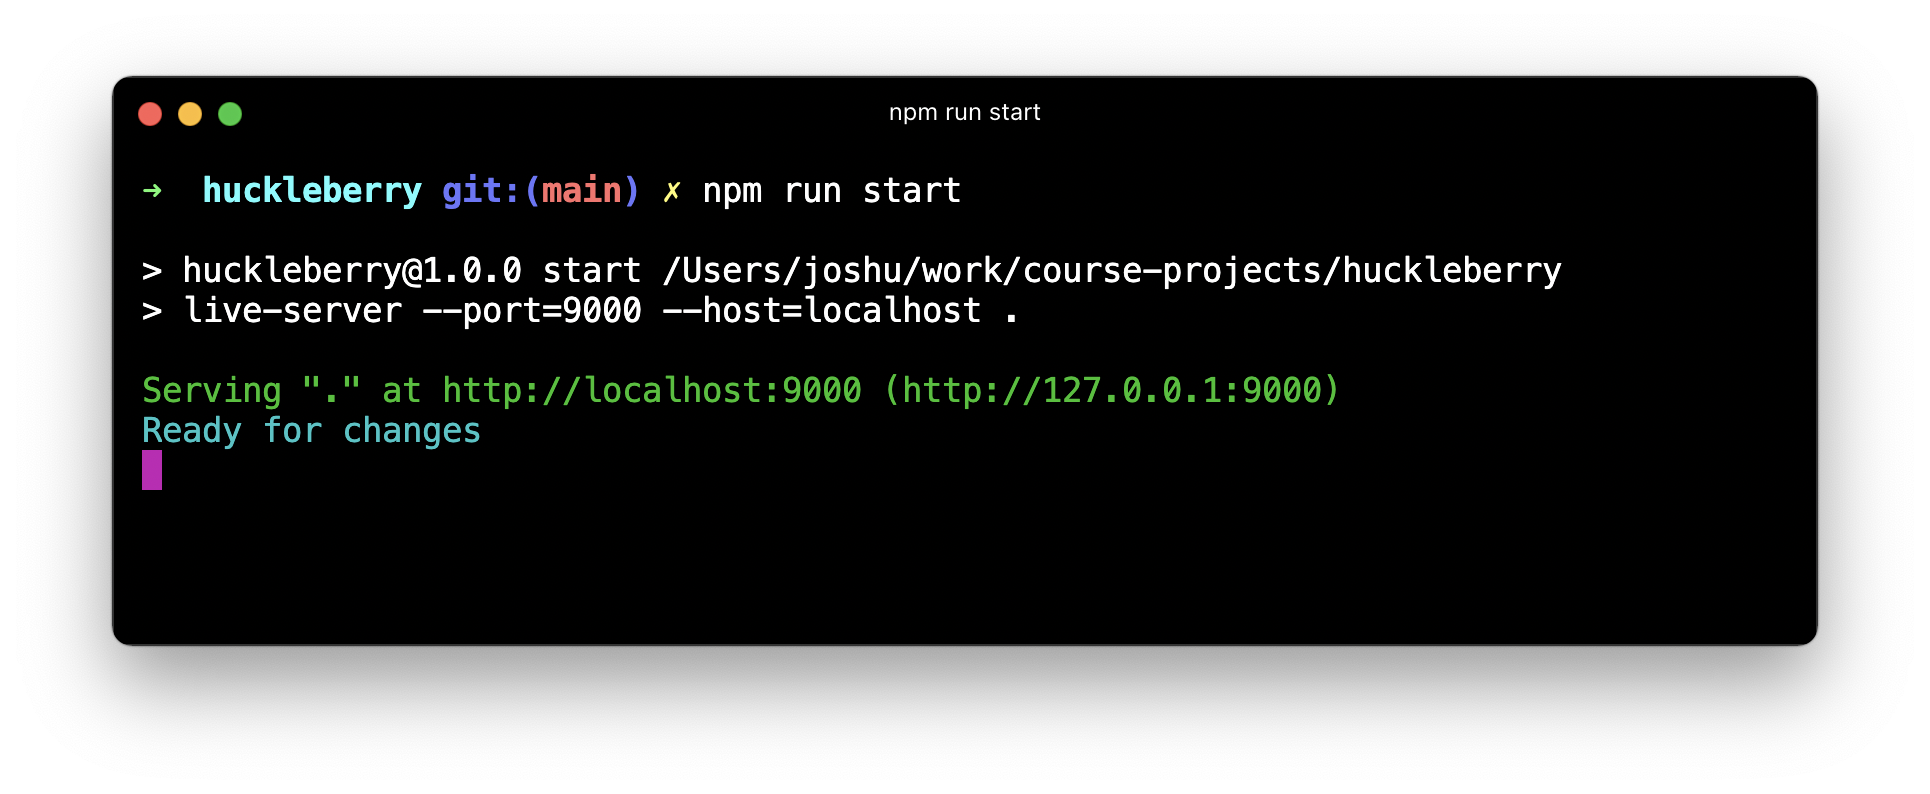 Screenshot of a terminal, showing a server running at http://localhost:9000